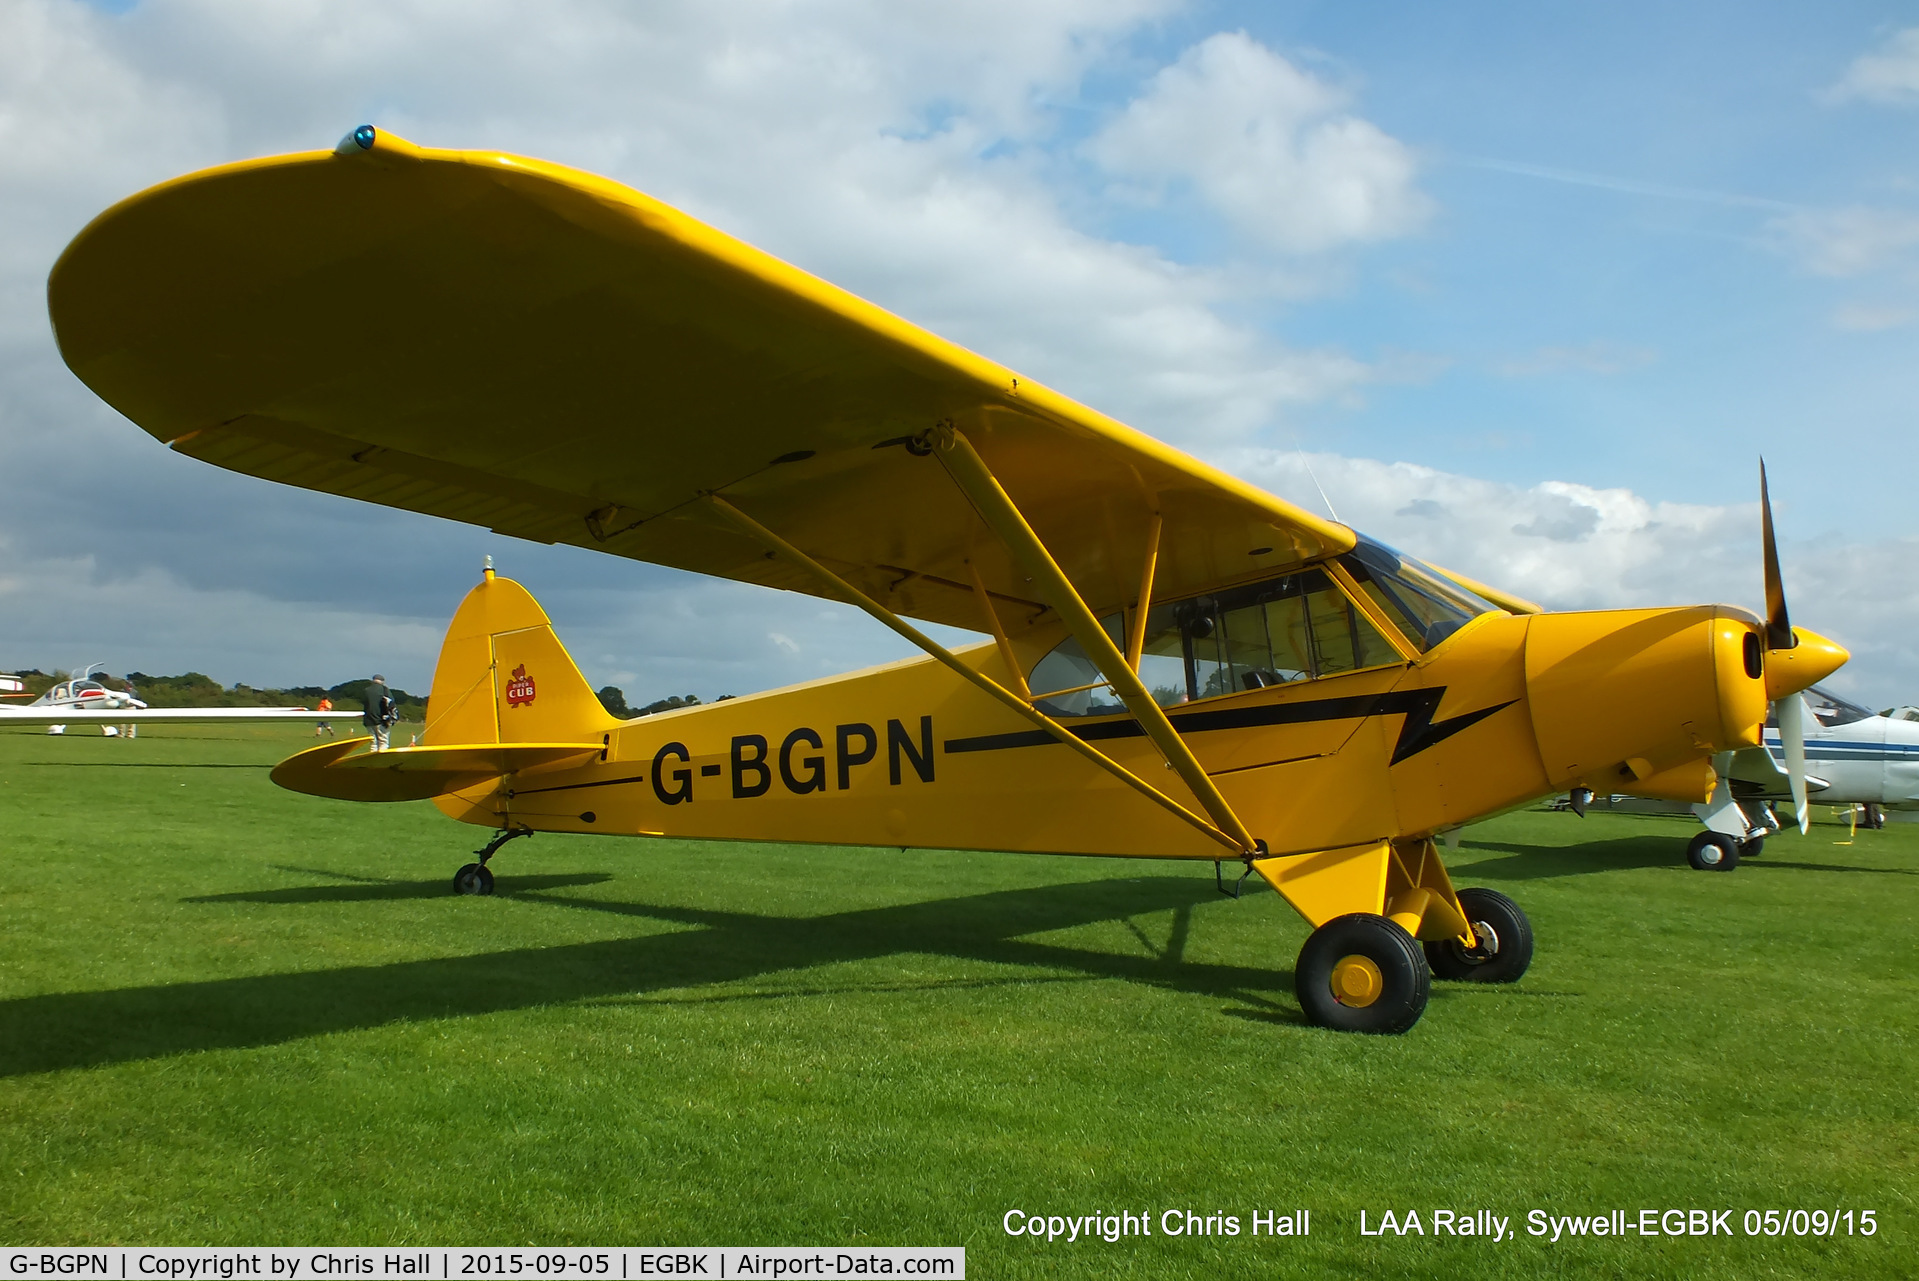 G-BGPN, 1978 Piper PA-18-150 Super Cub C/N 18-7909044, at the LAA Rally 2015, Sywell